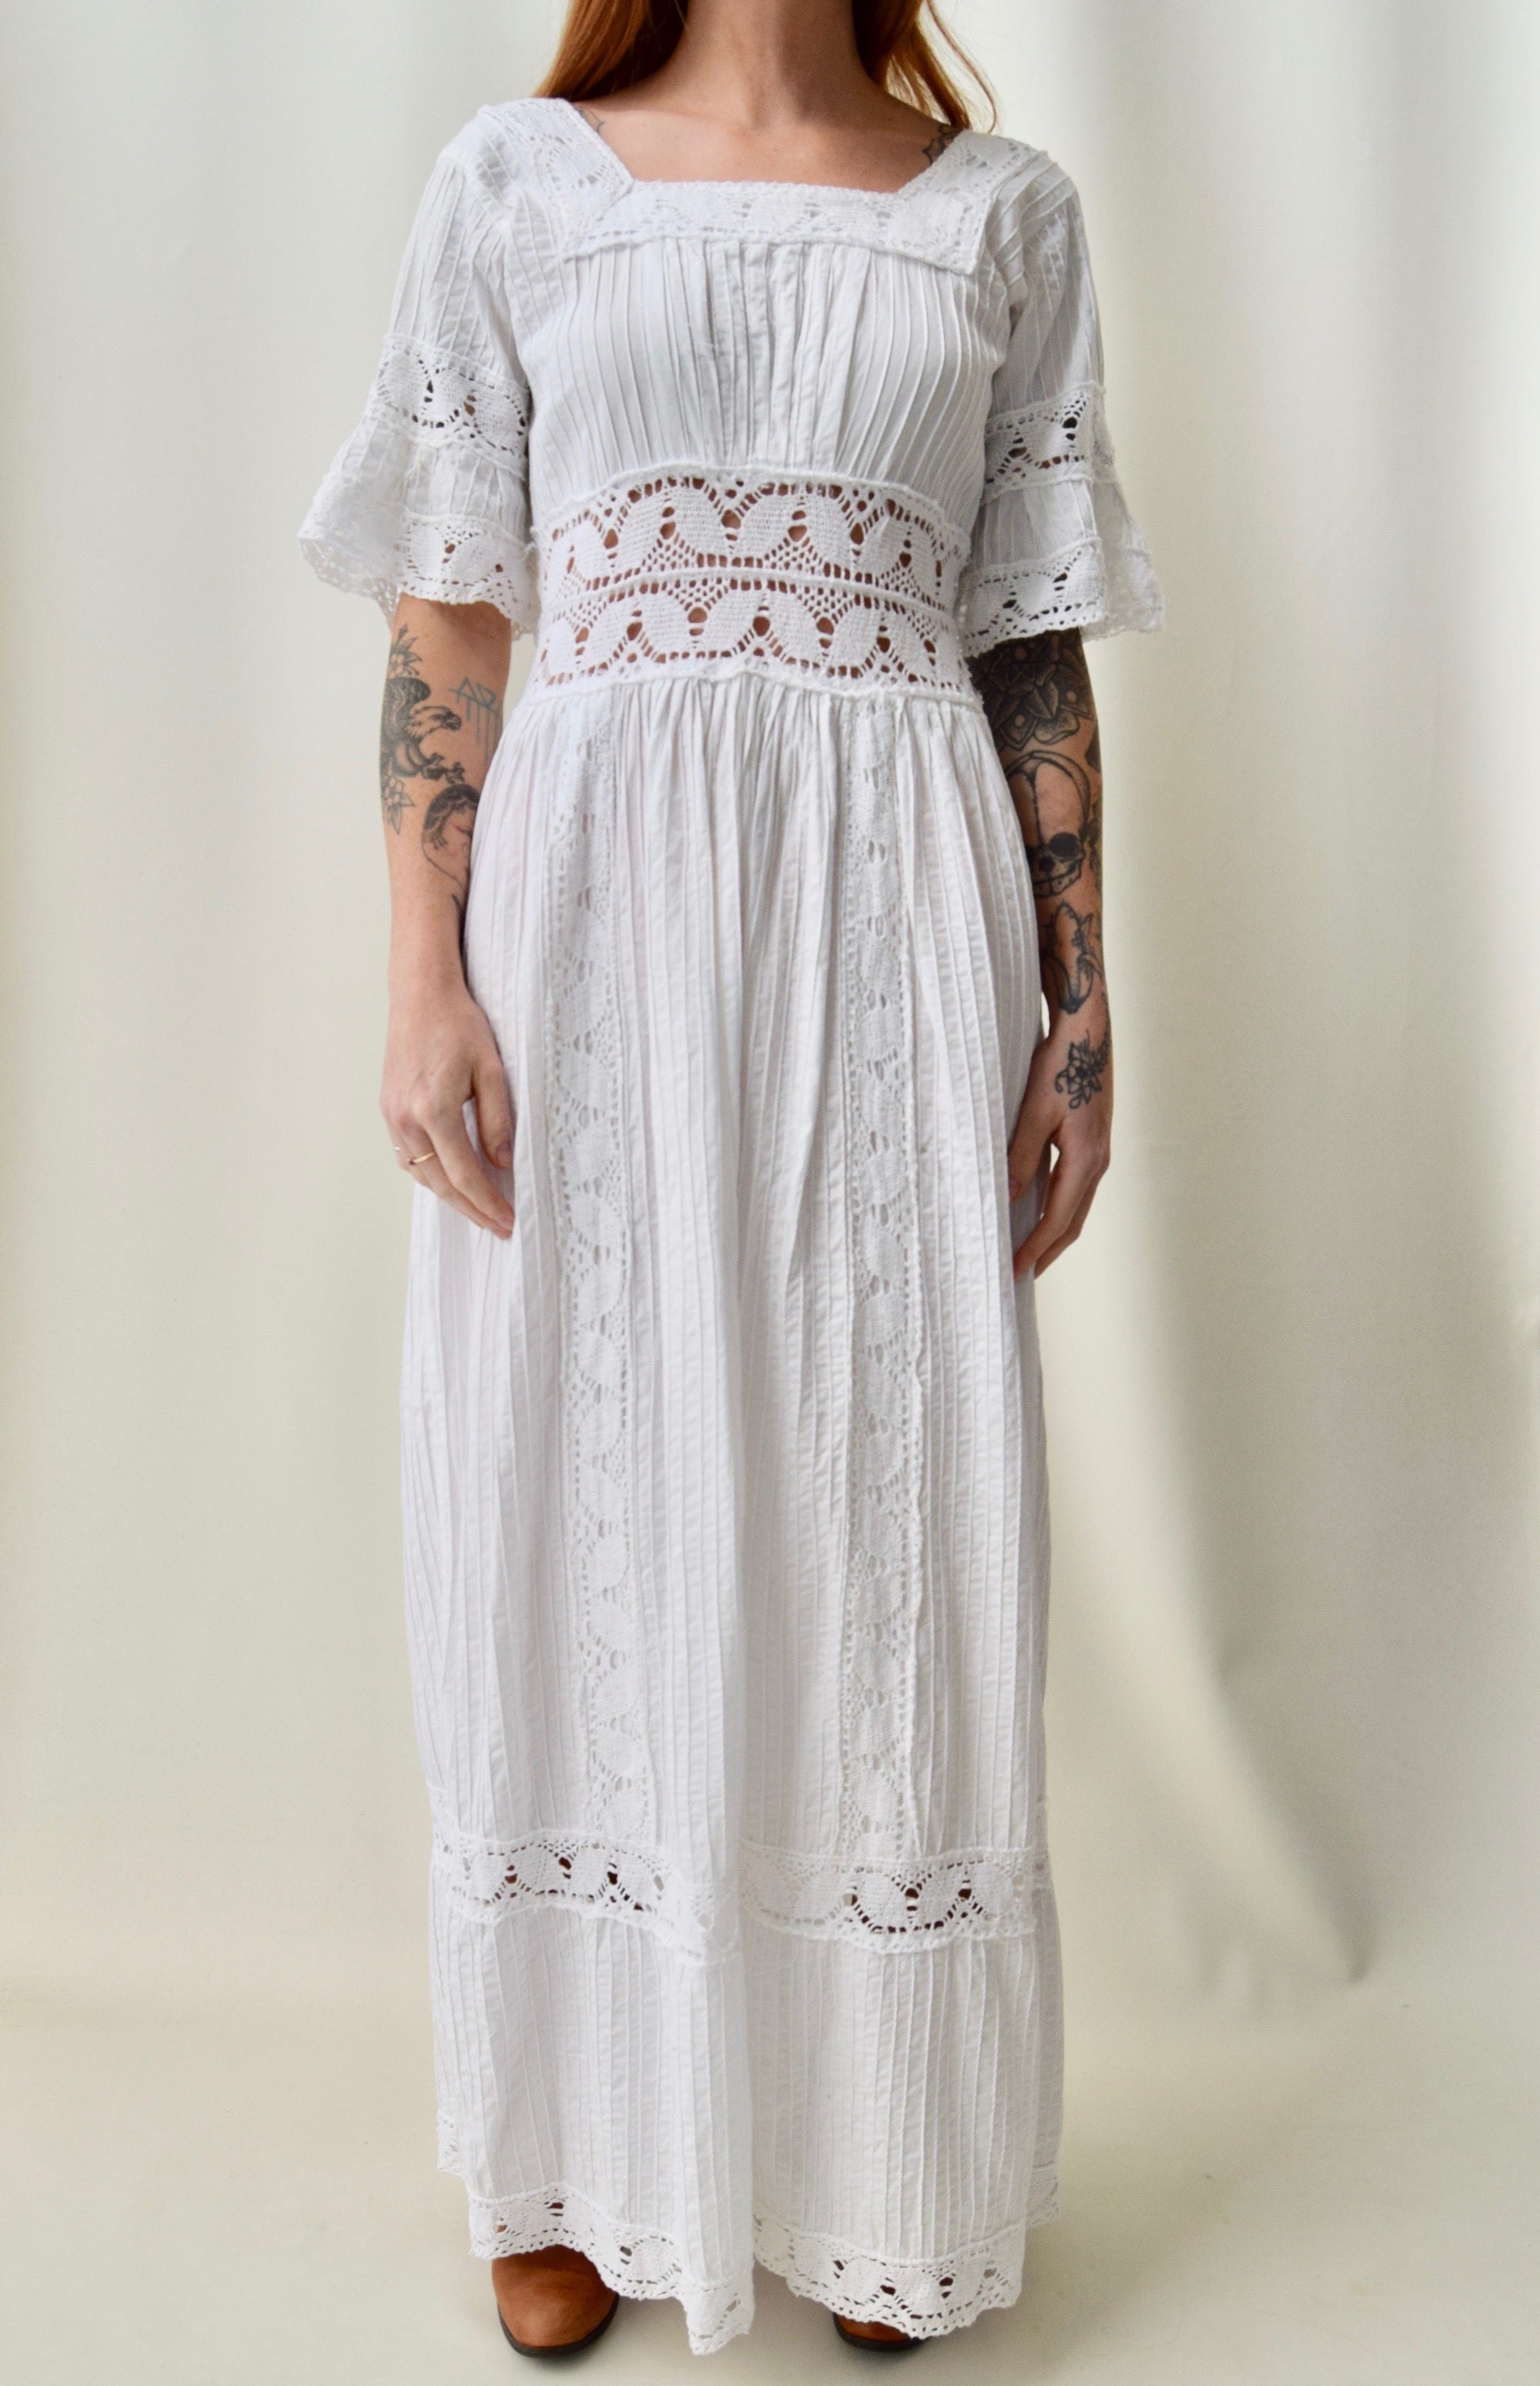 Vintage Mexican Crocheted Lace Wedding Dress